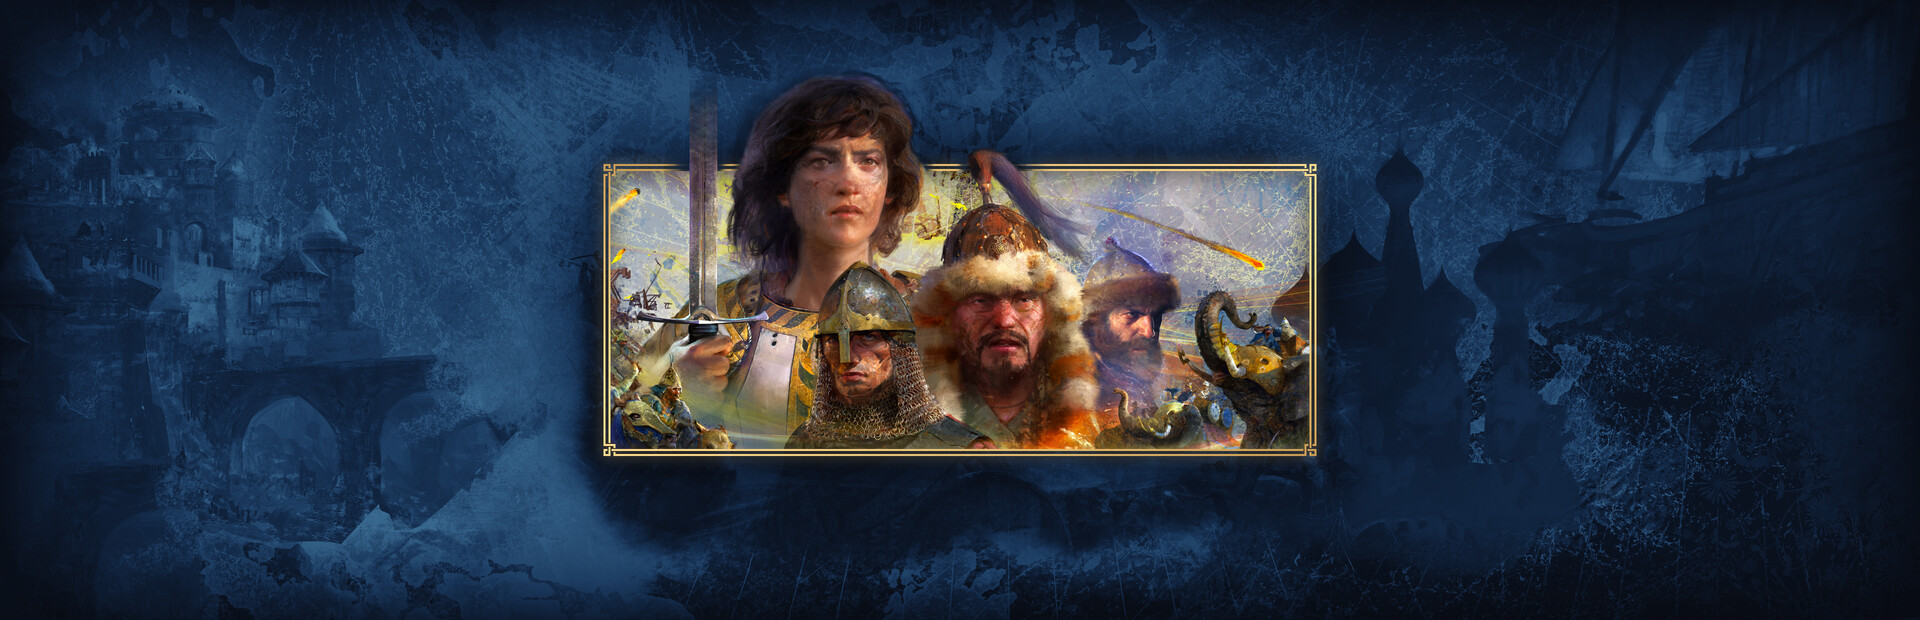 Age of Empires IV: Anniversary Edition cover image